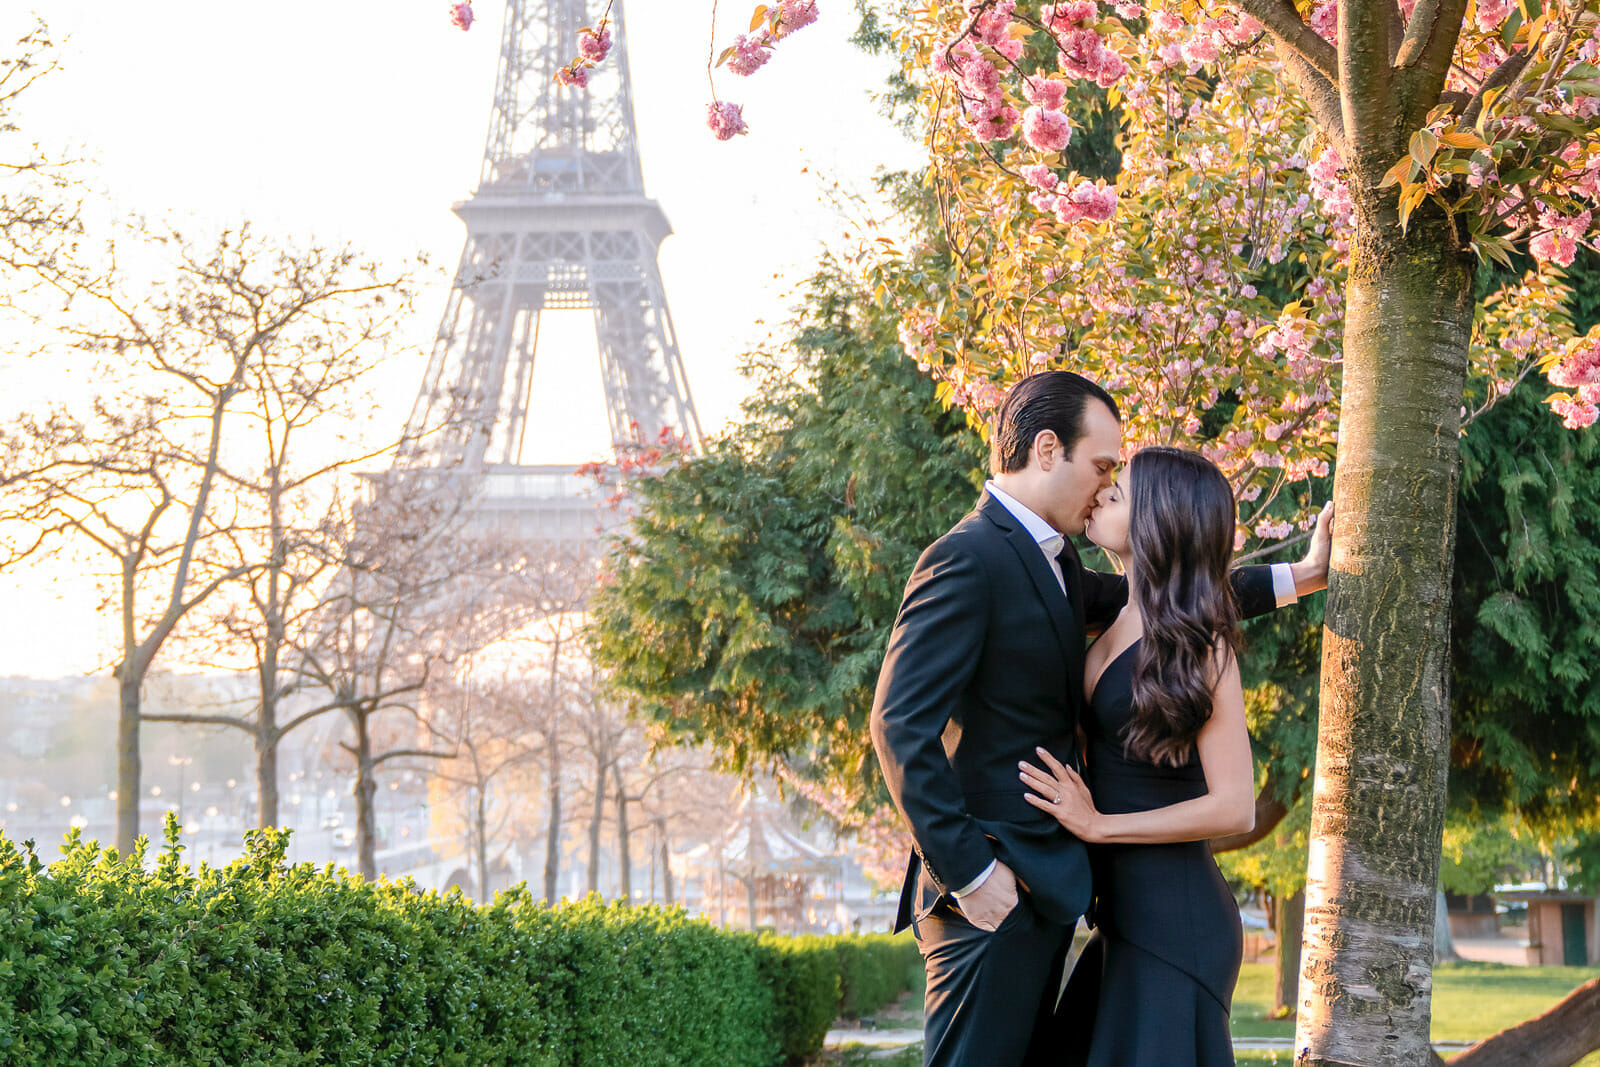 Romantic Paris photoshoot: Eiffel Tower with Cherry Blossoms in Bloom